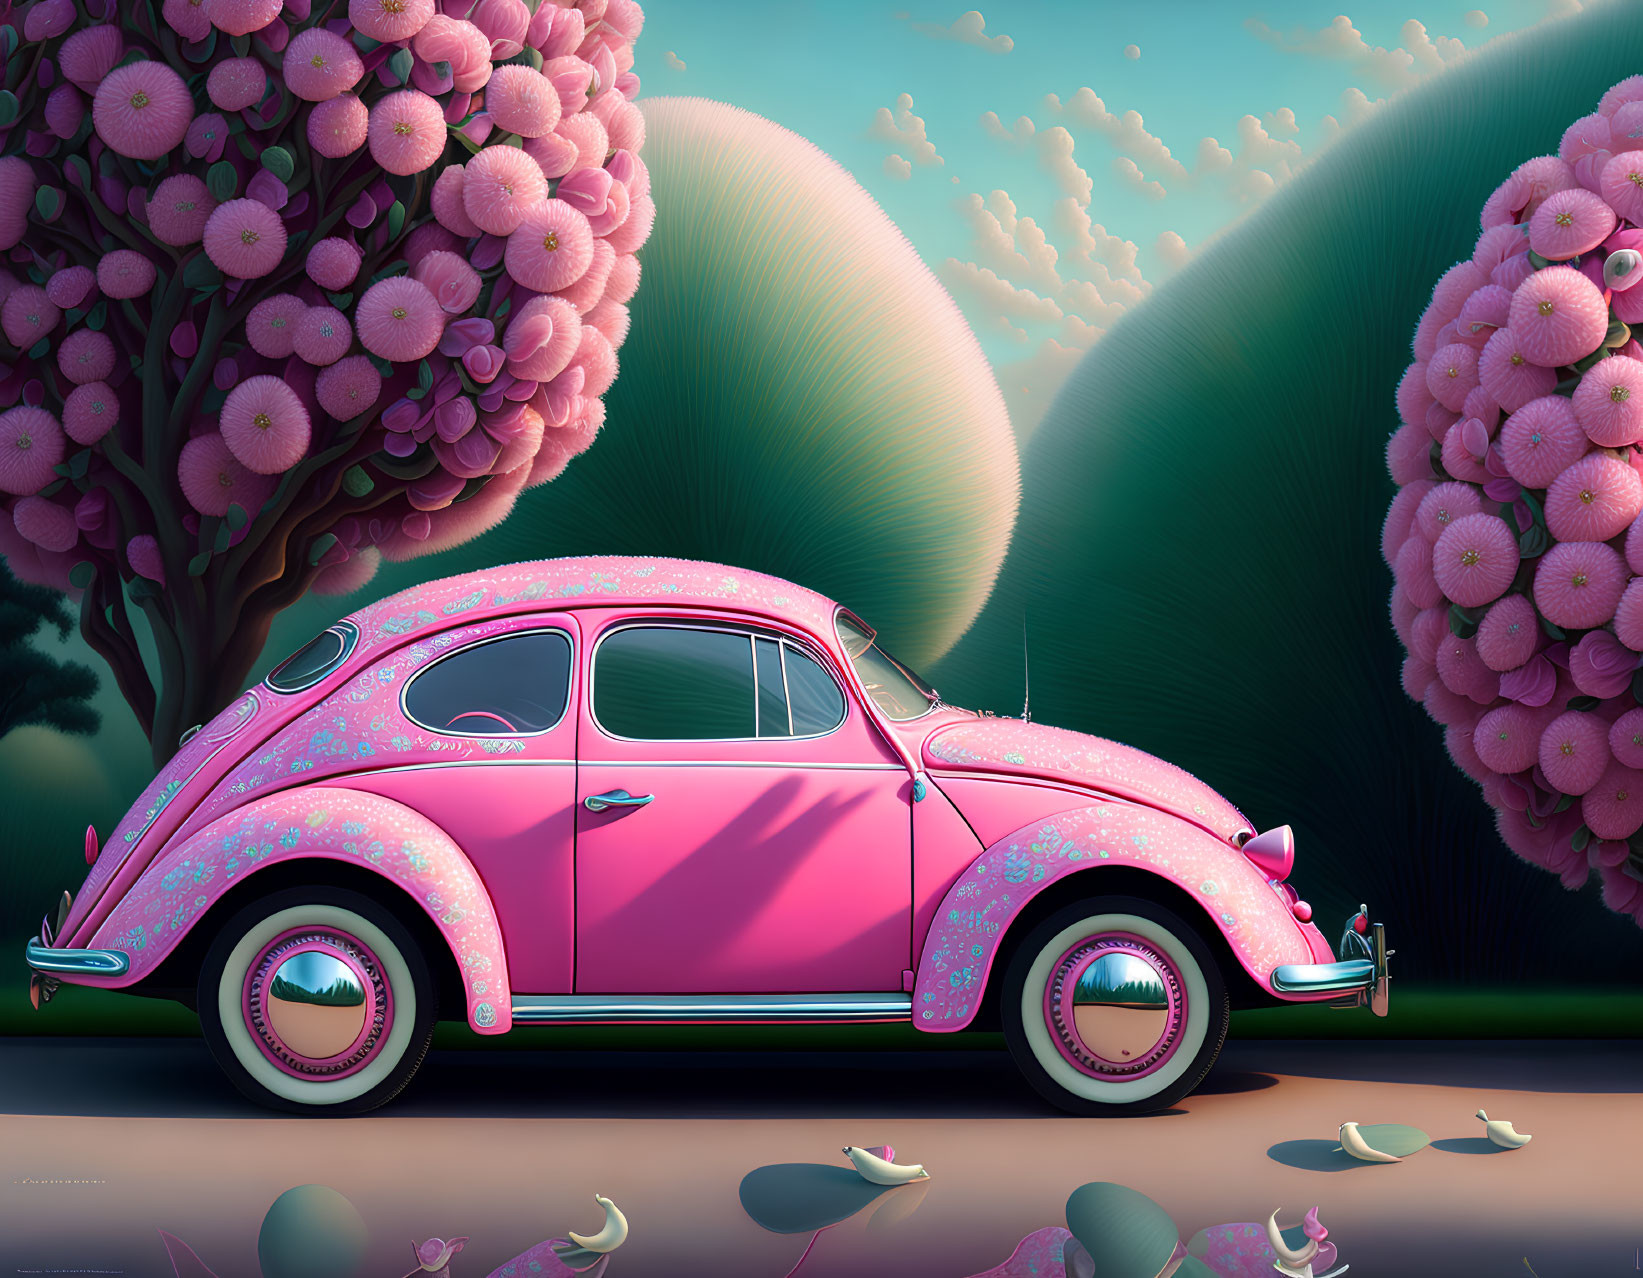 Colorful VW Beetle illustration with pink floral design and surreal blossoms under dreamy sky